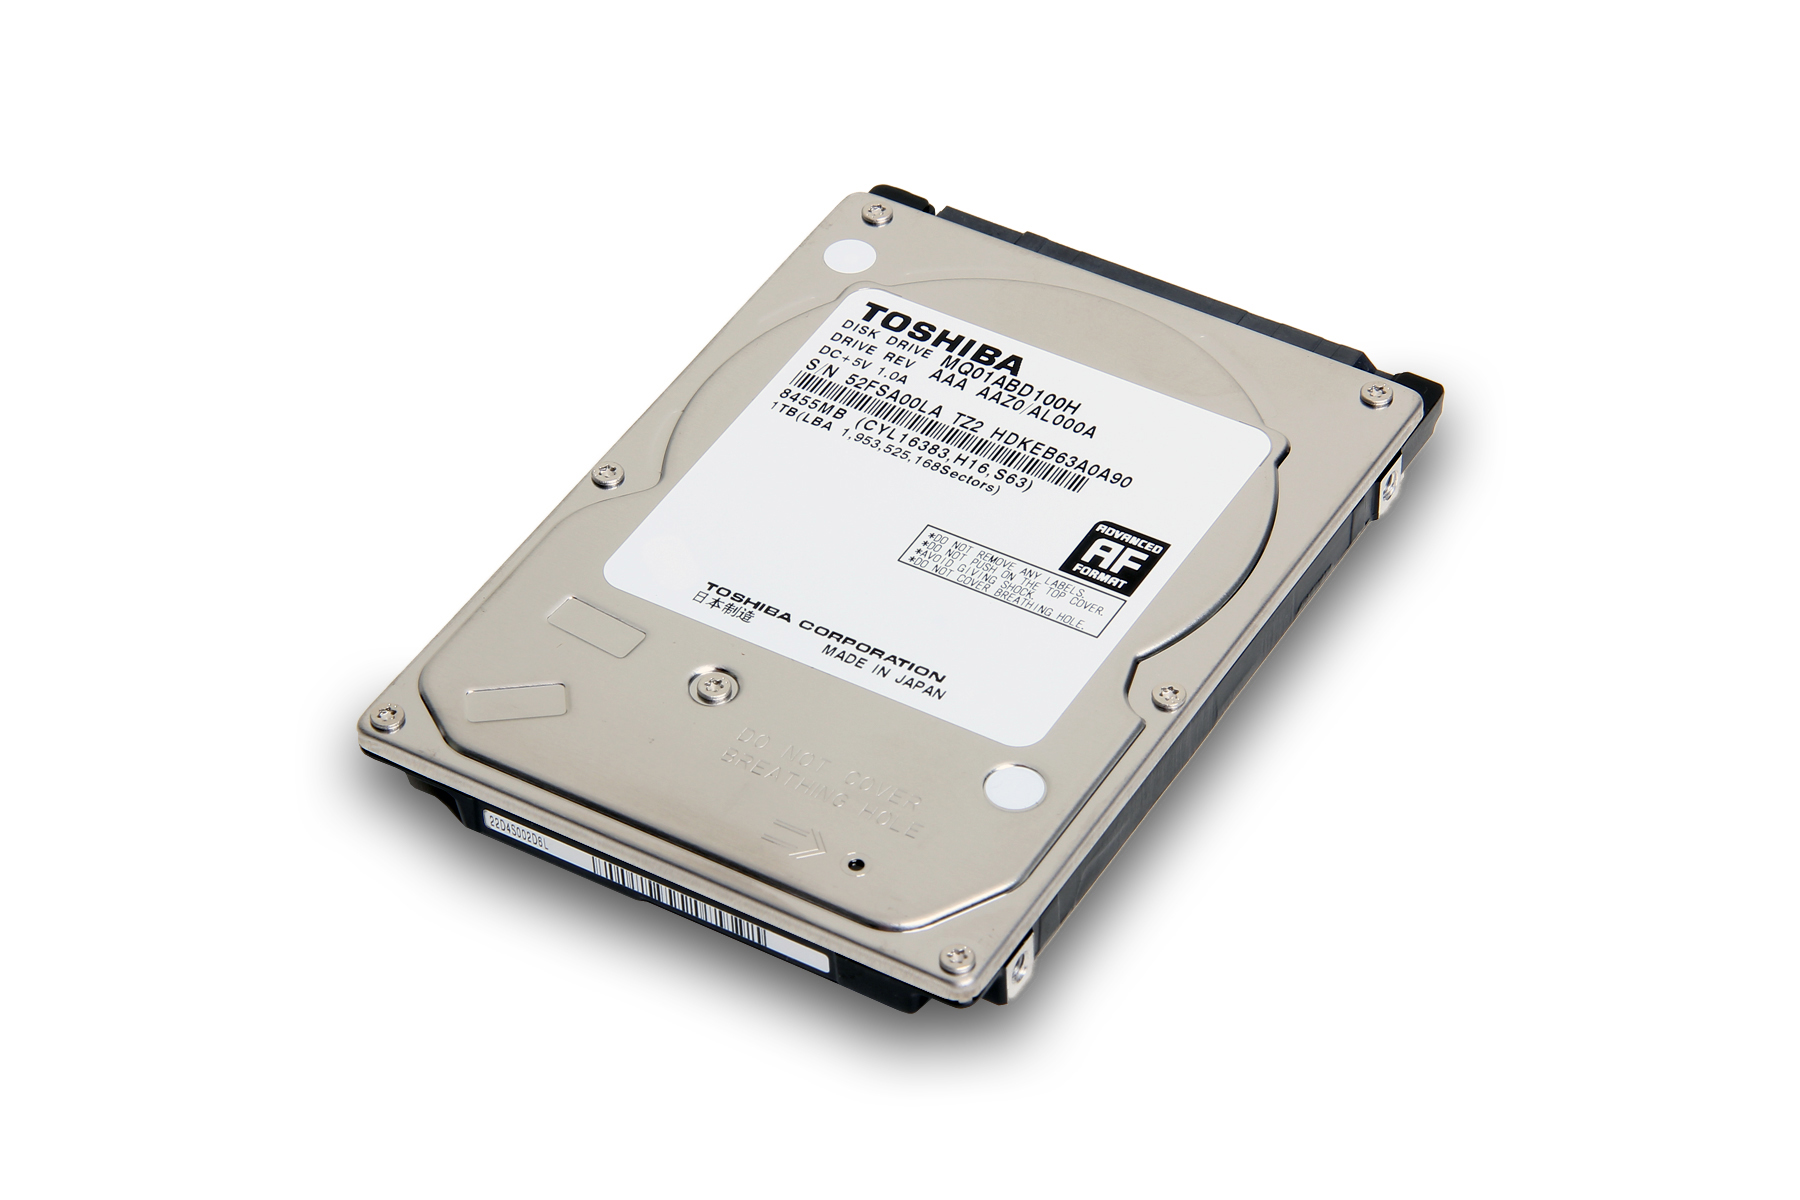 Toshiba to Sell Own Hybrid Drive for Laptops